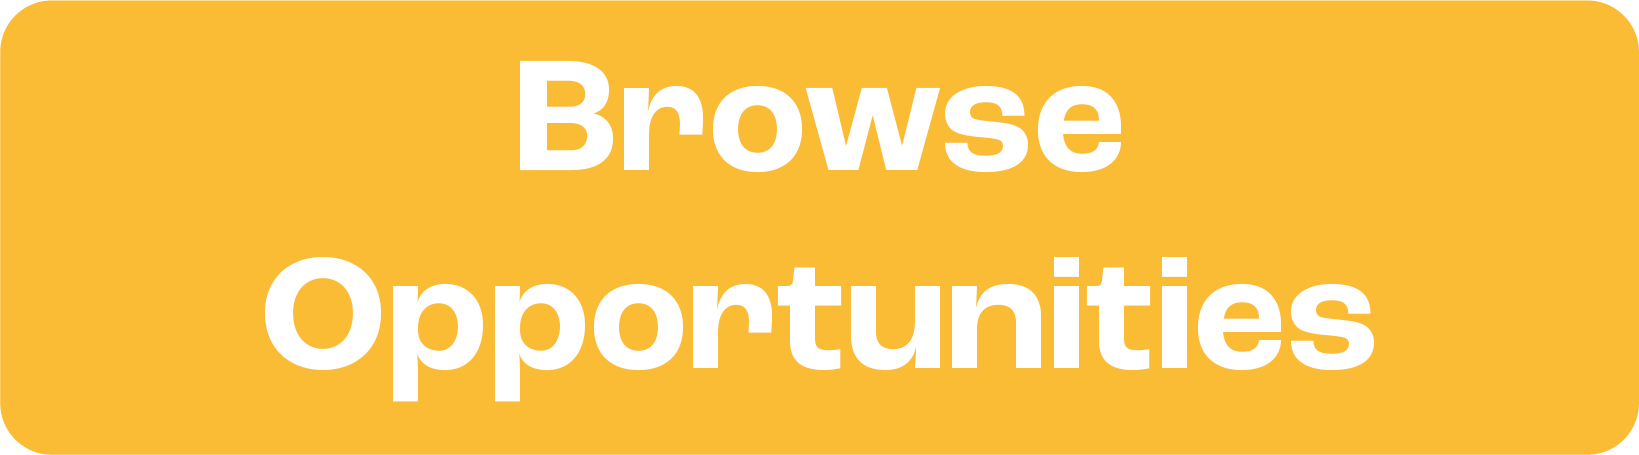 Browse opportunities